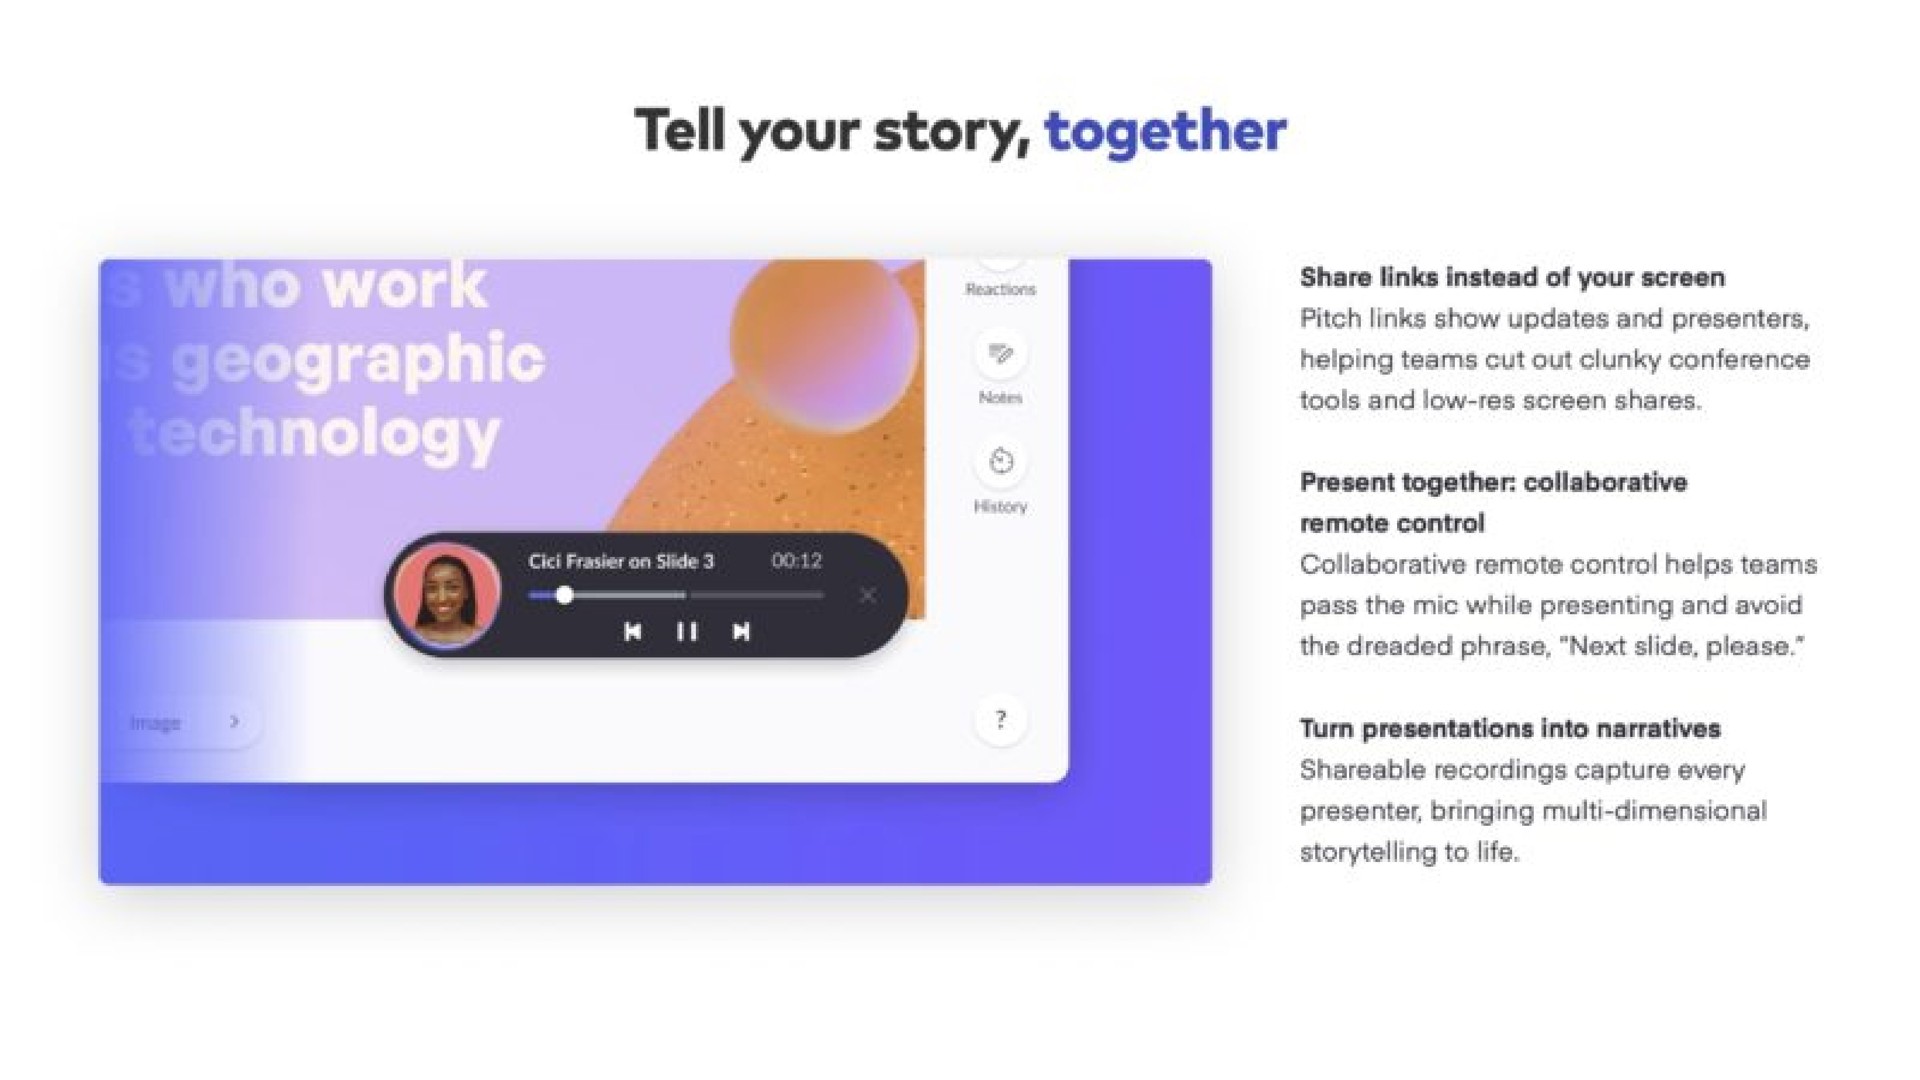 tell your story together | Pitch